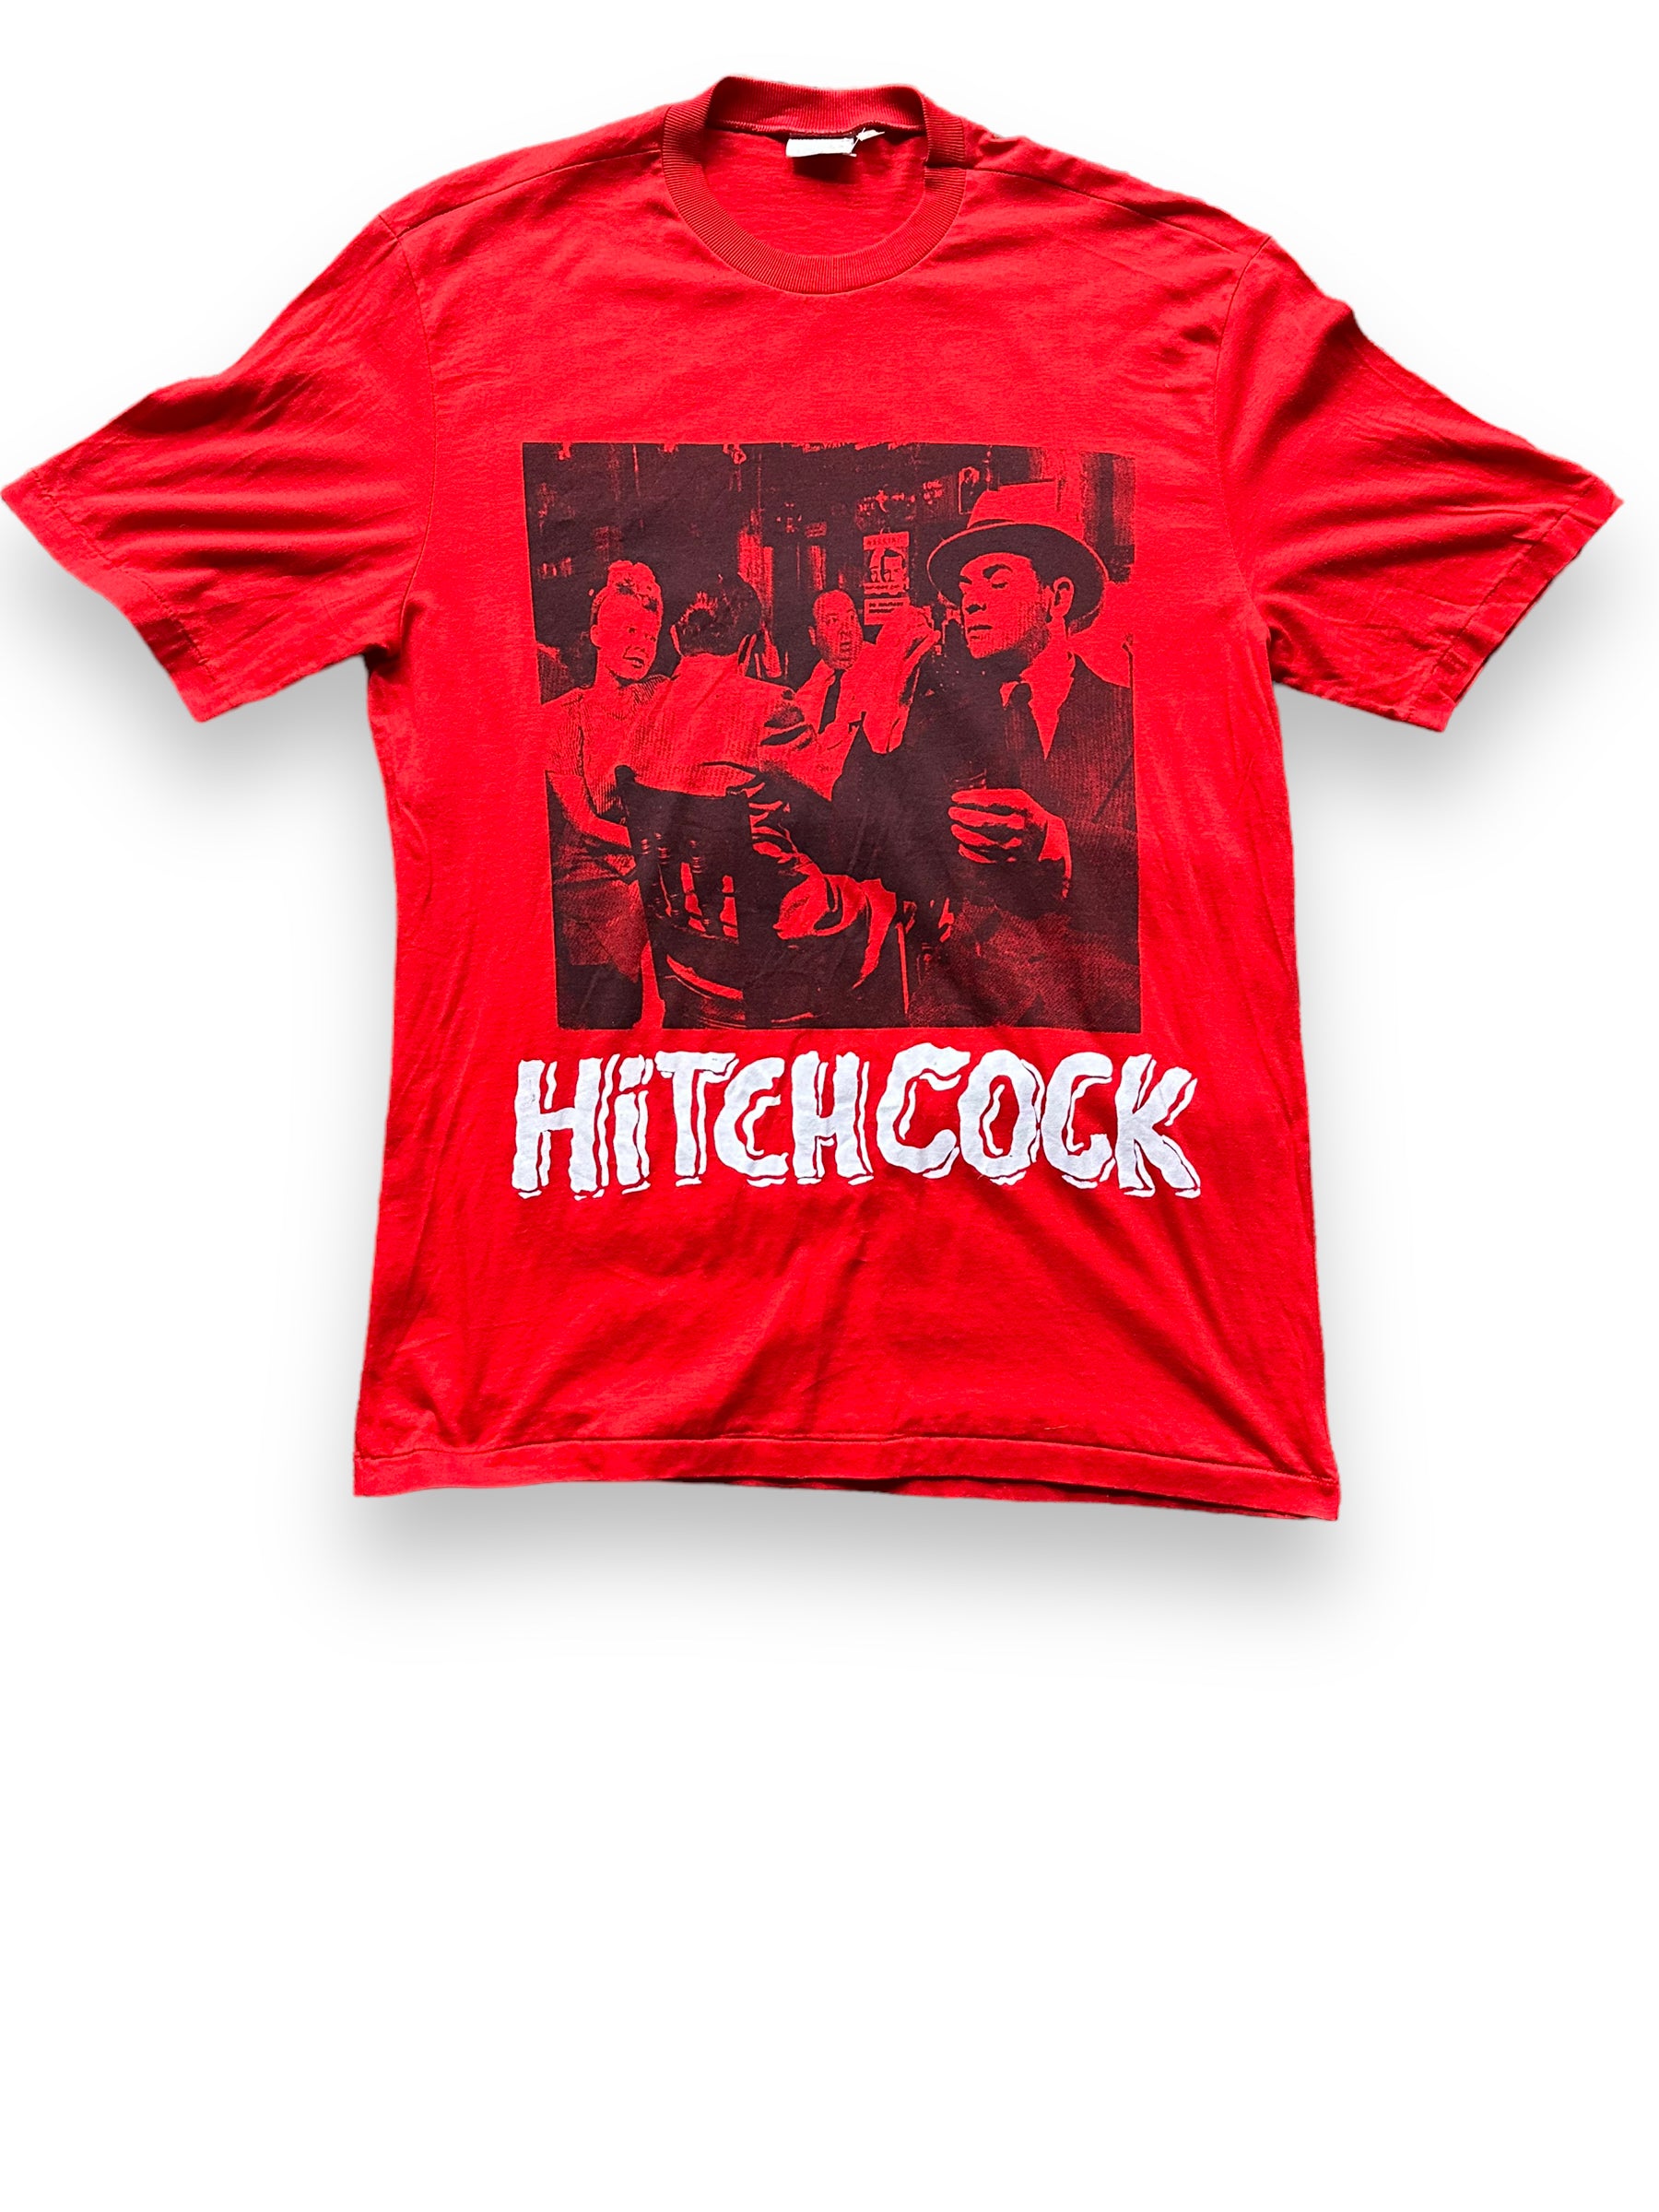 Front View of Vintage Alfred Hitchcock Tee SZ L | Vintage Hitchock T-Shirt Seattle | Barn Owl Vintage Tees Seattle